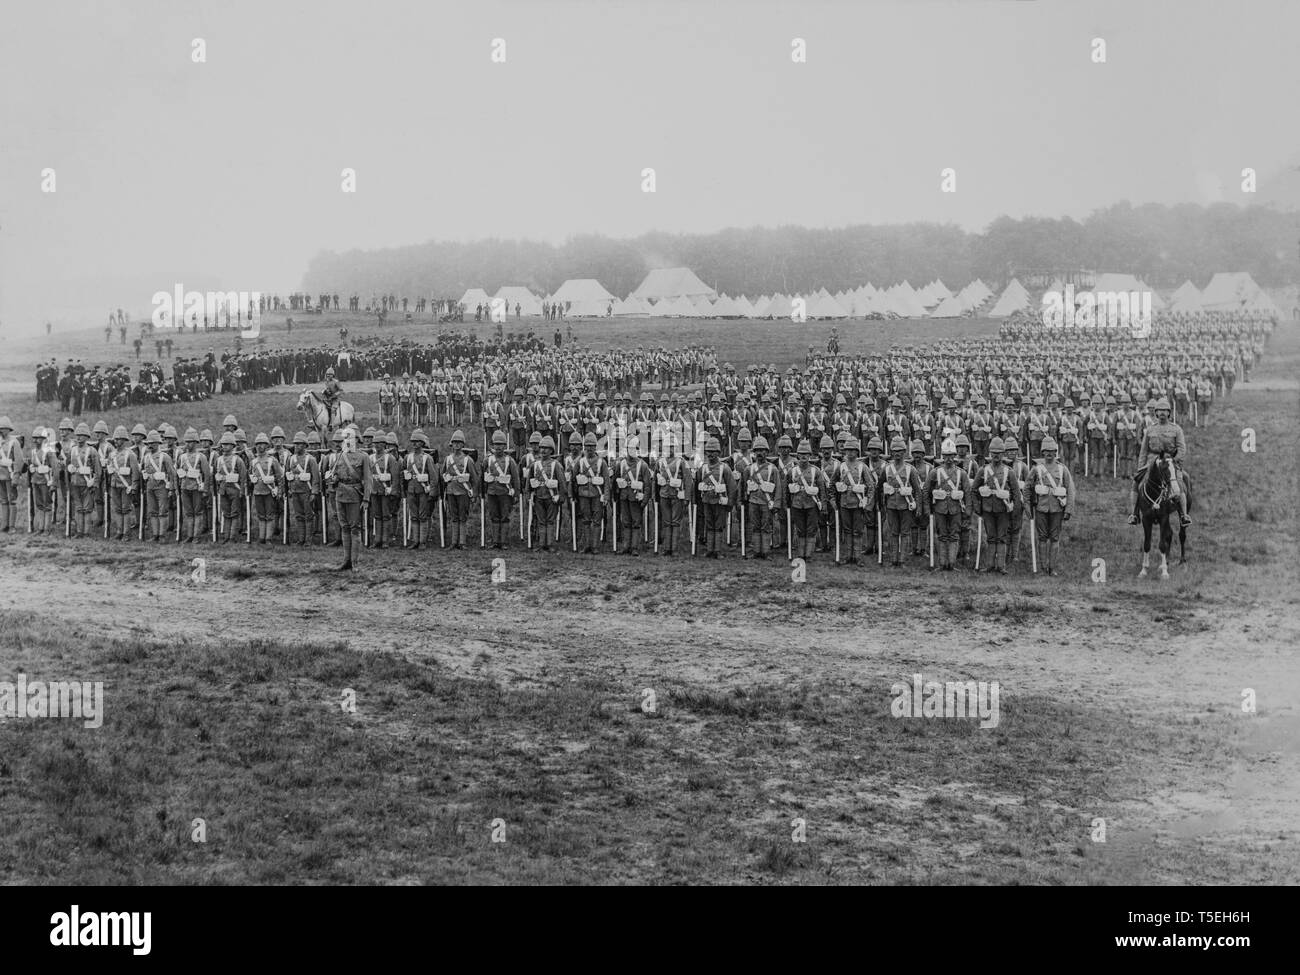 The Northumberland Fusiliers, a Regiment in the British army, parading in Southern Africa during the Boer war. Stock Photo